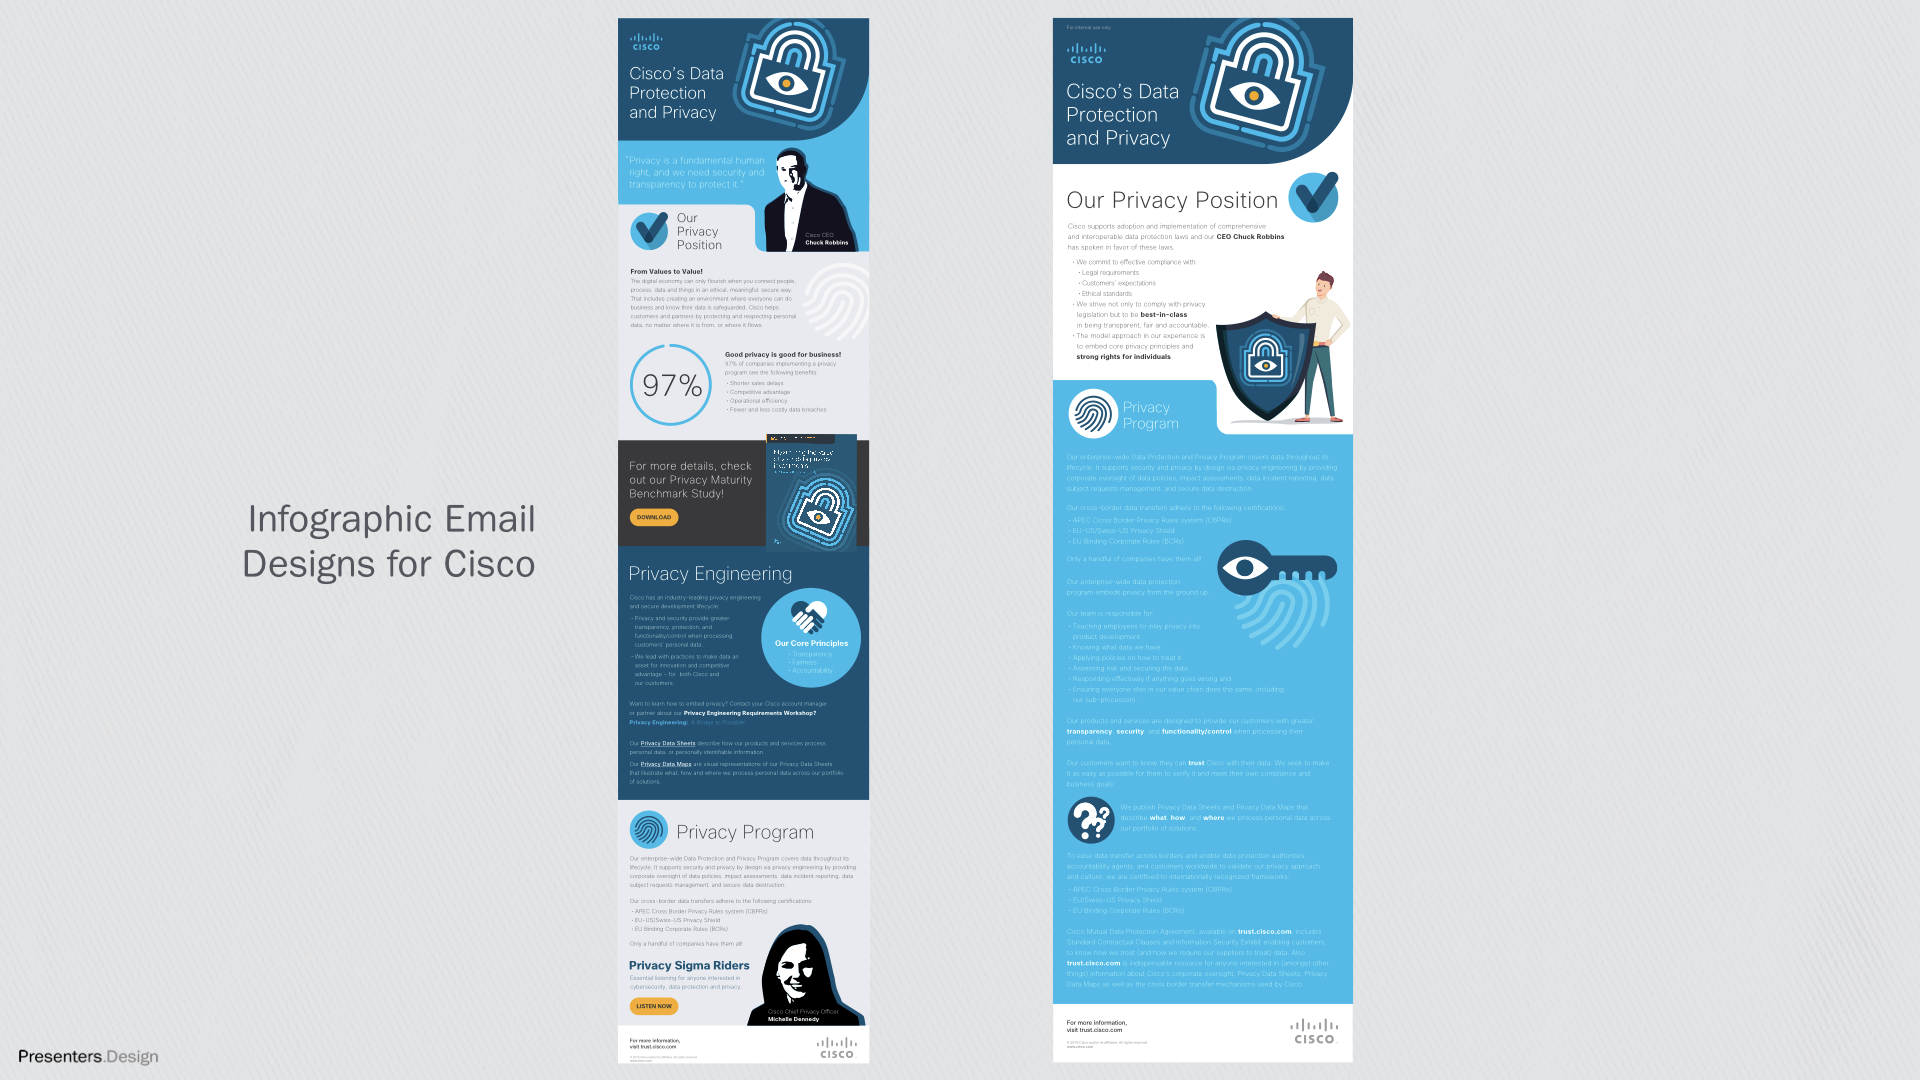 Infographic Email Designs for Cisco